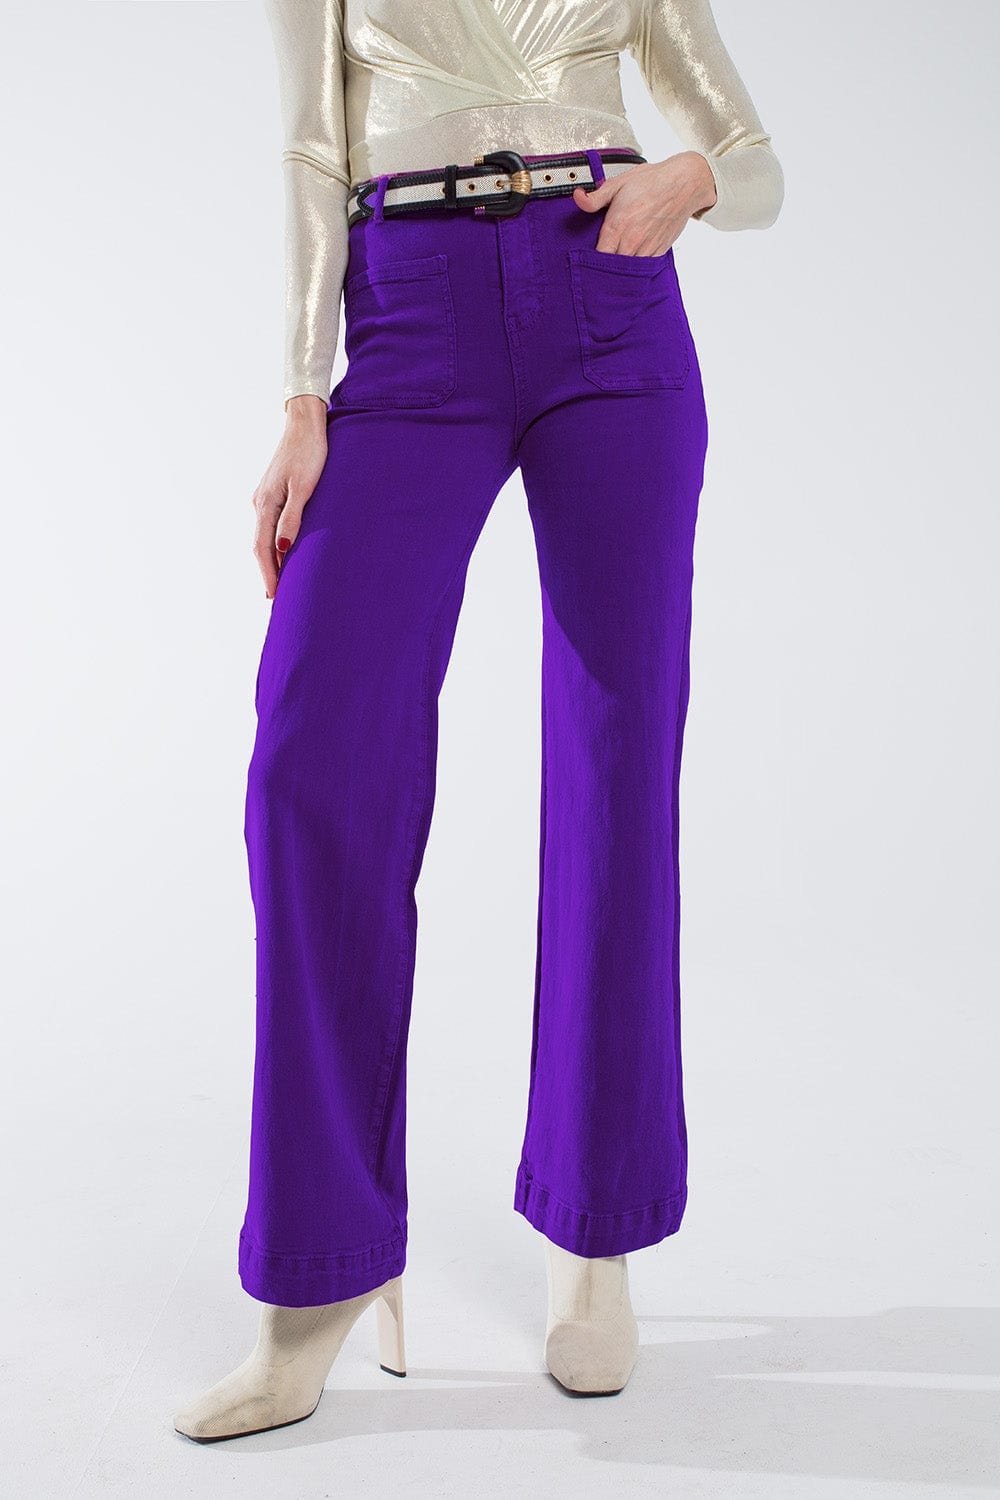 Q2 Women's Jean Purple Flair Jeans With Large Front Pockets